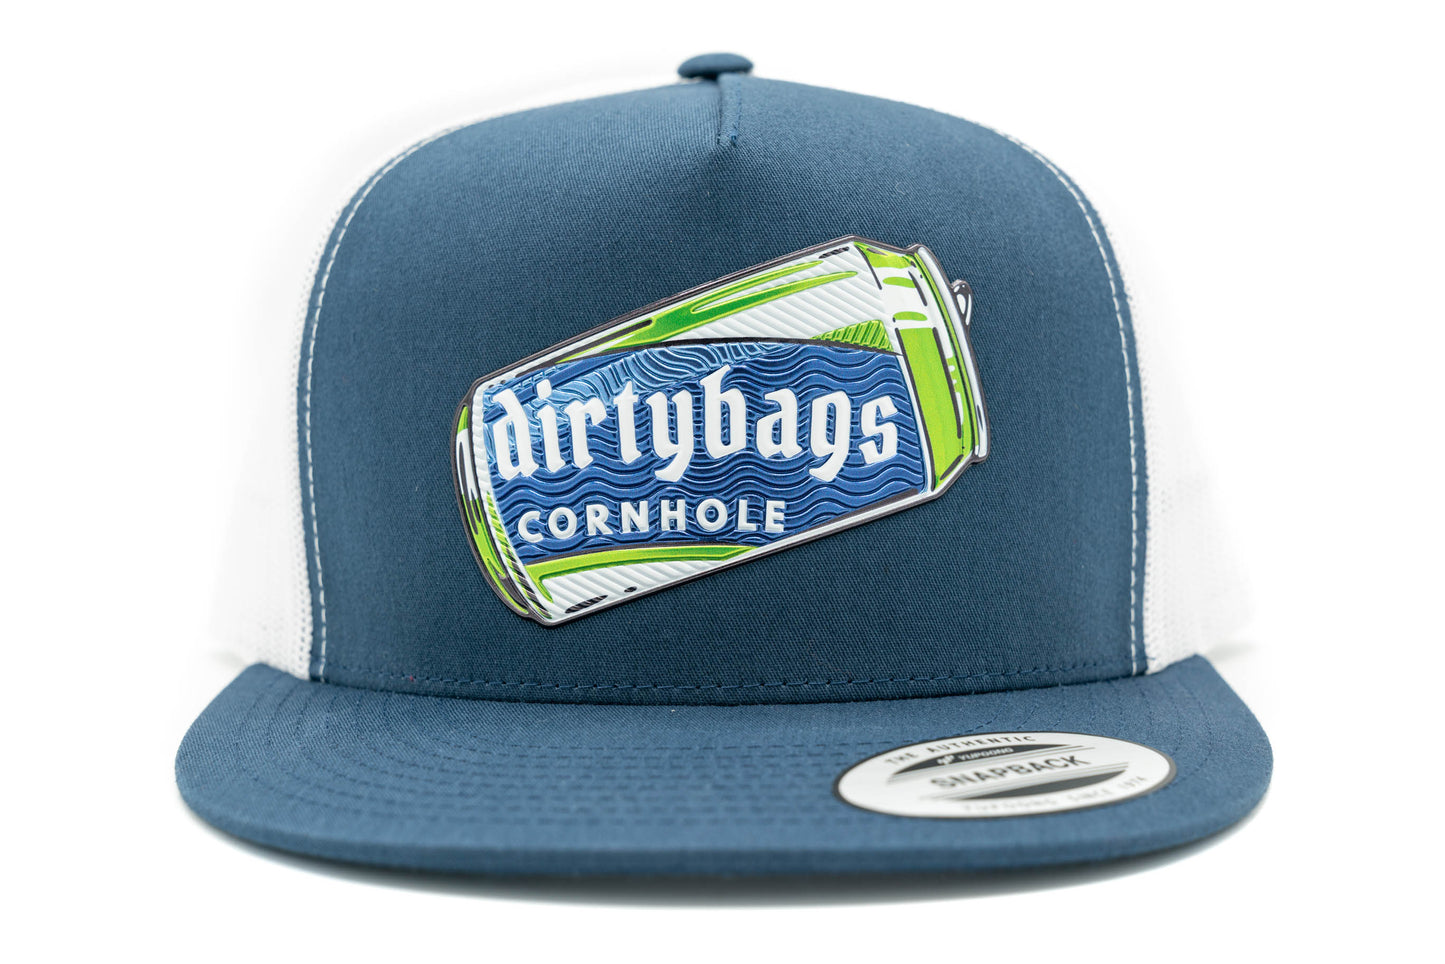 dirtybags cornhole Beer Can Hat -